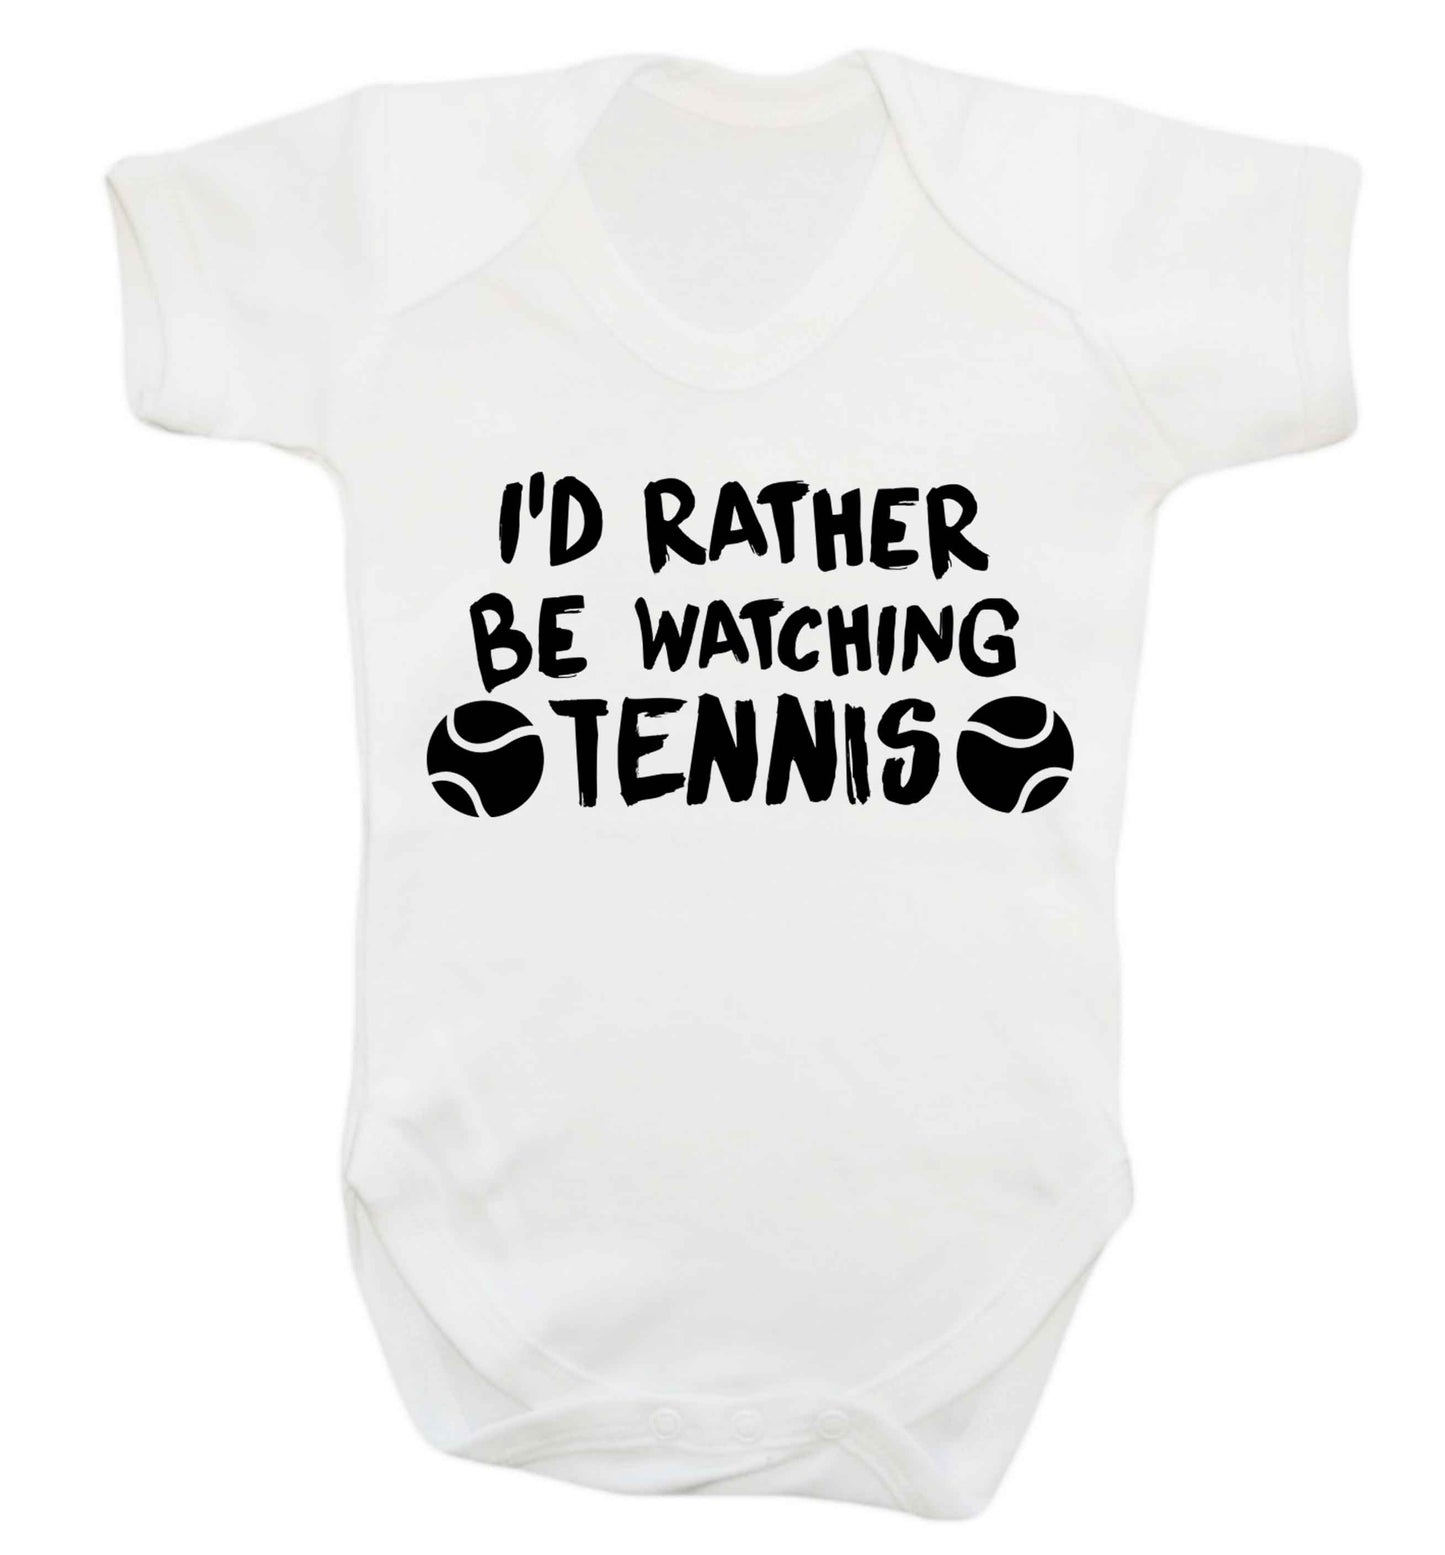 I'd rather be watching the tennis Baby Vest white 18-24 months